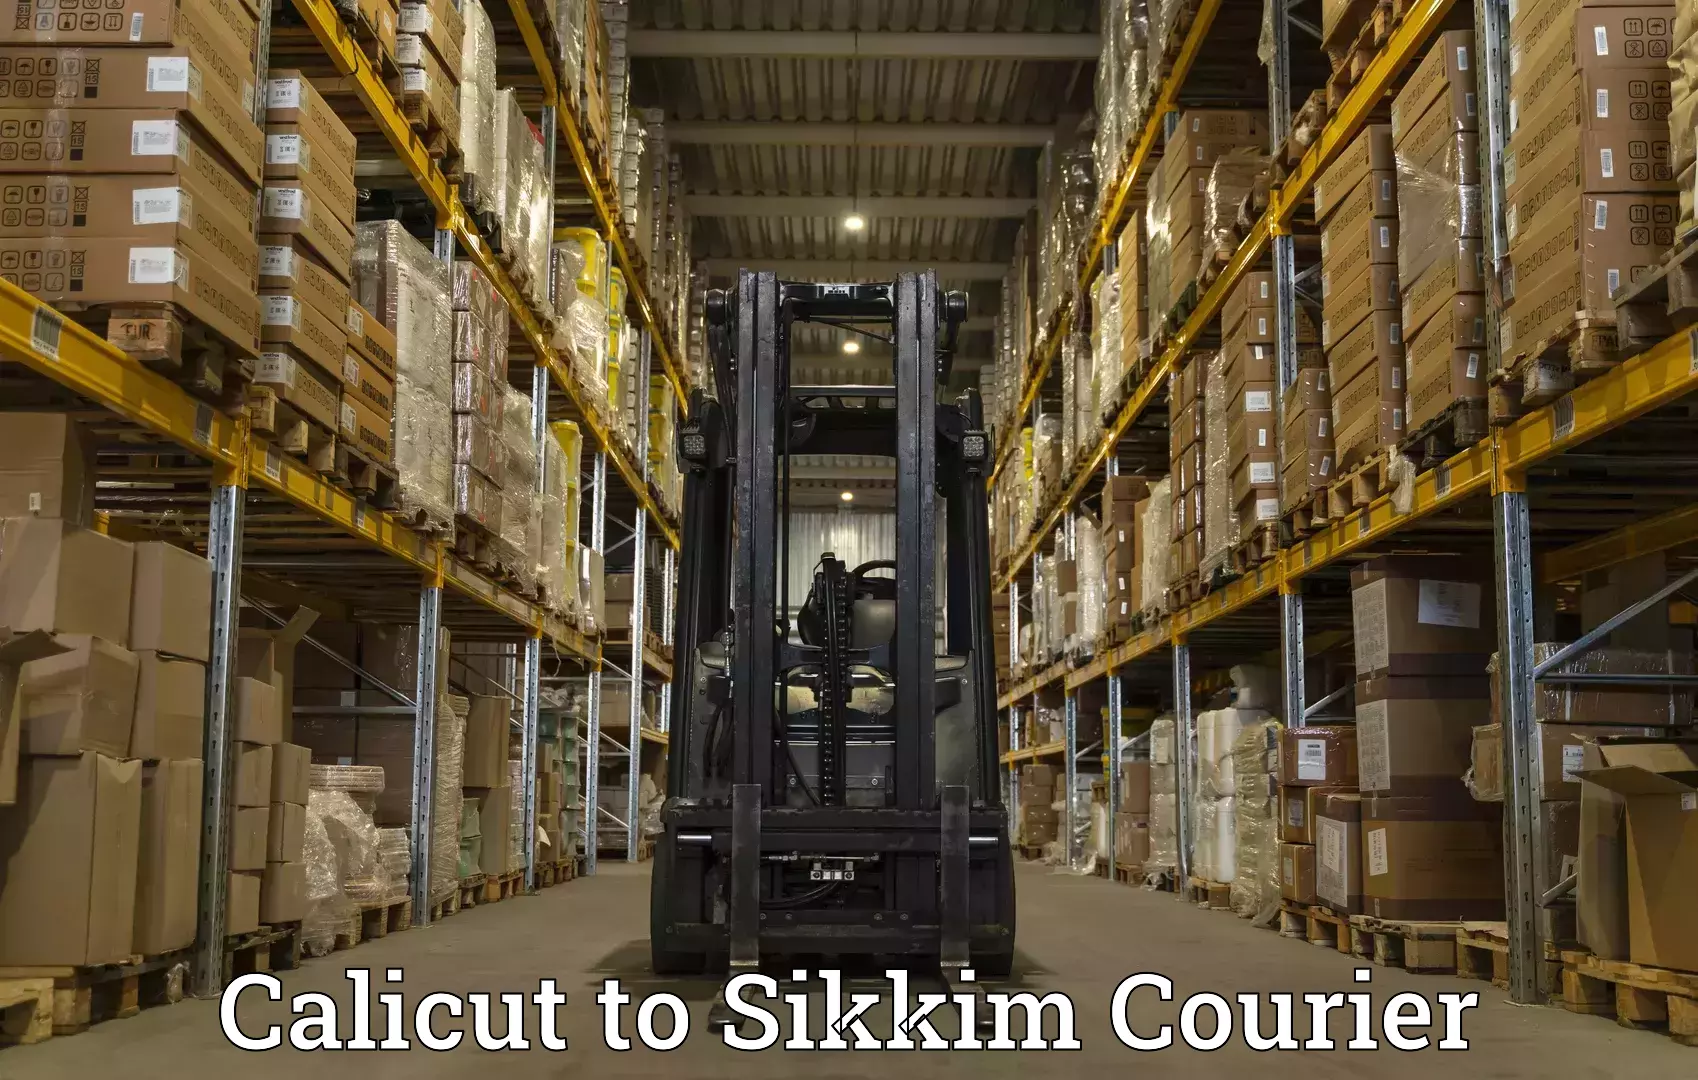 Express delivery capabilities Calicut to Sikkim